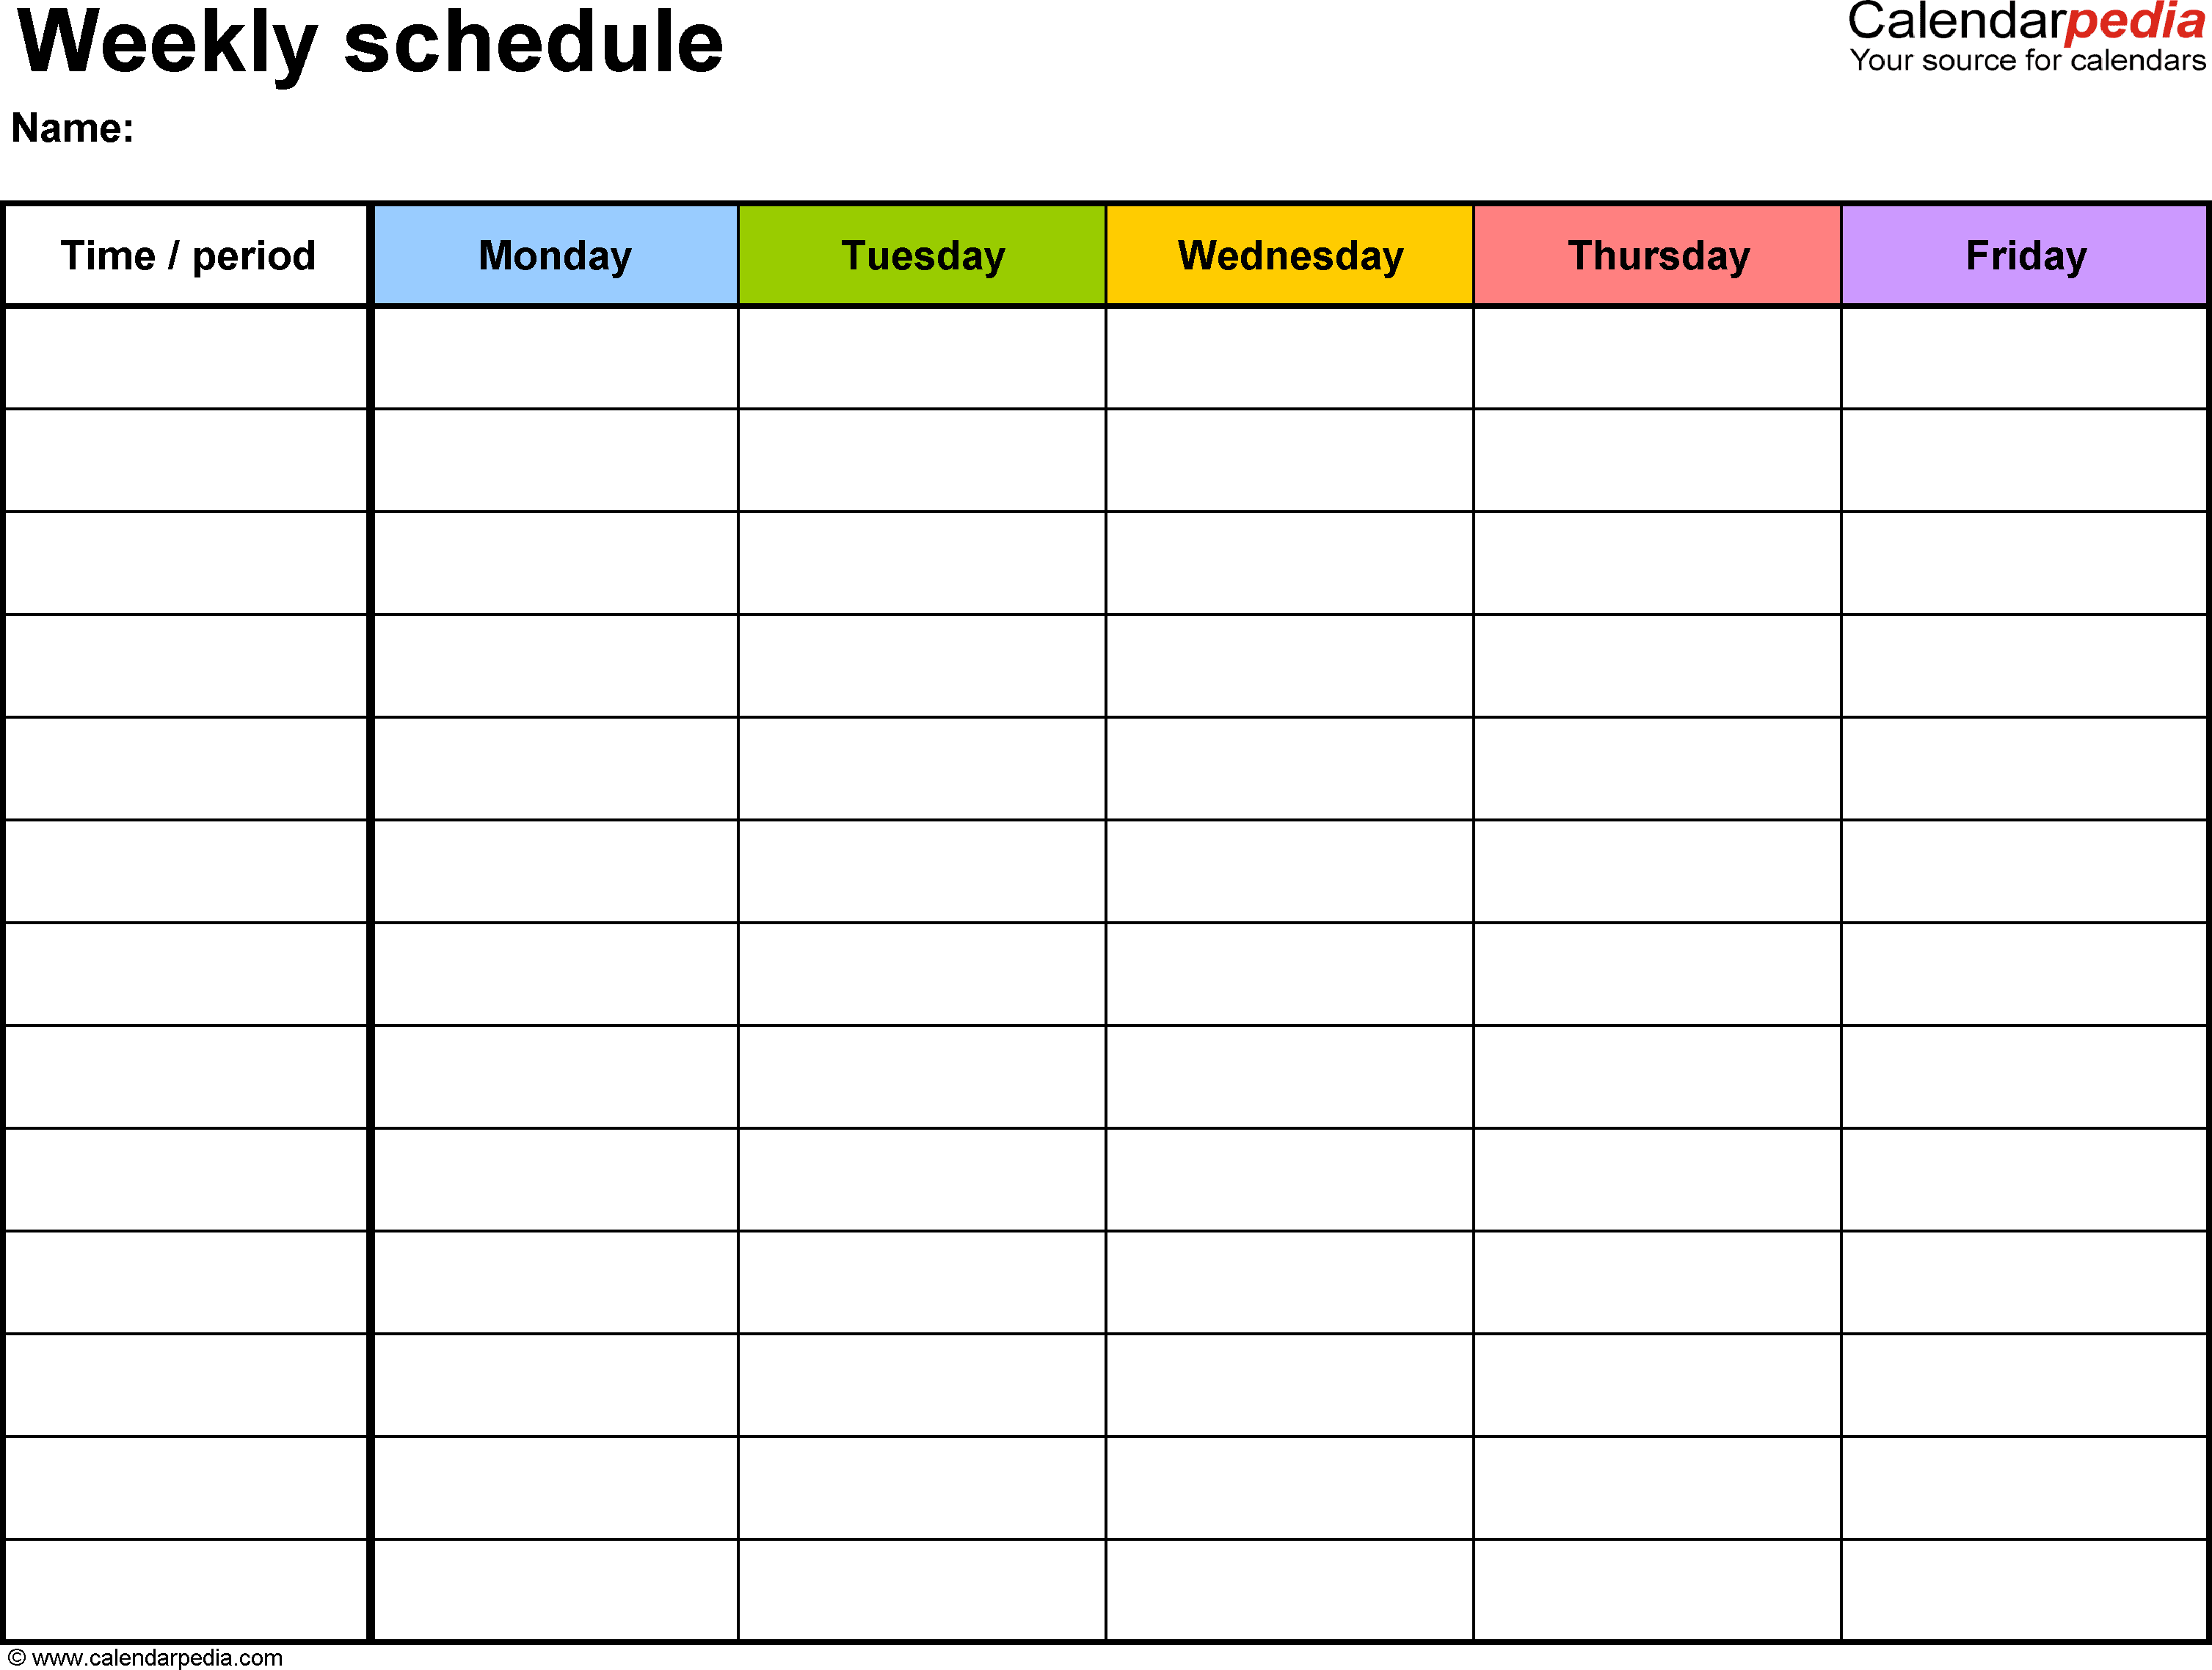 Free Weekly Schedule Templates for PDF   18 templates